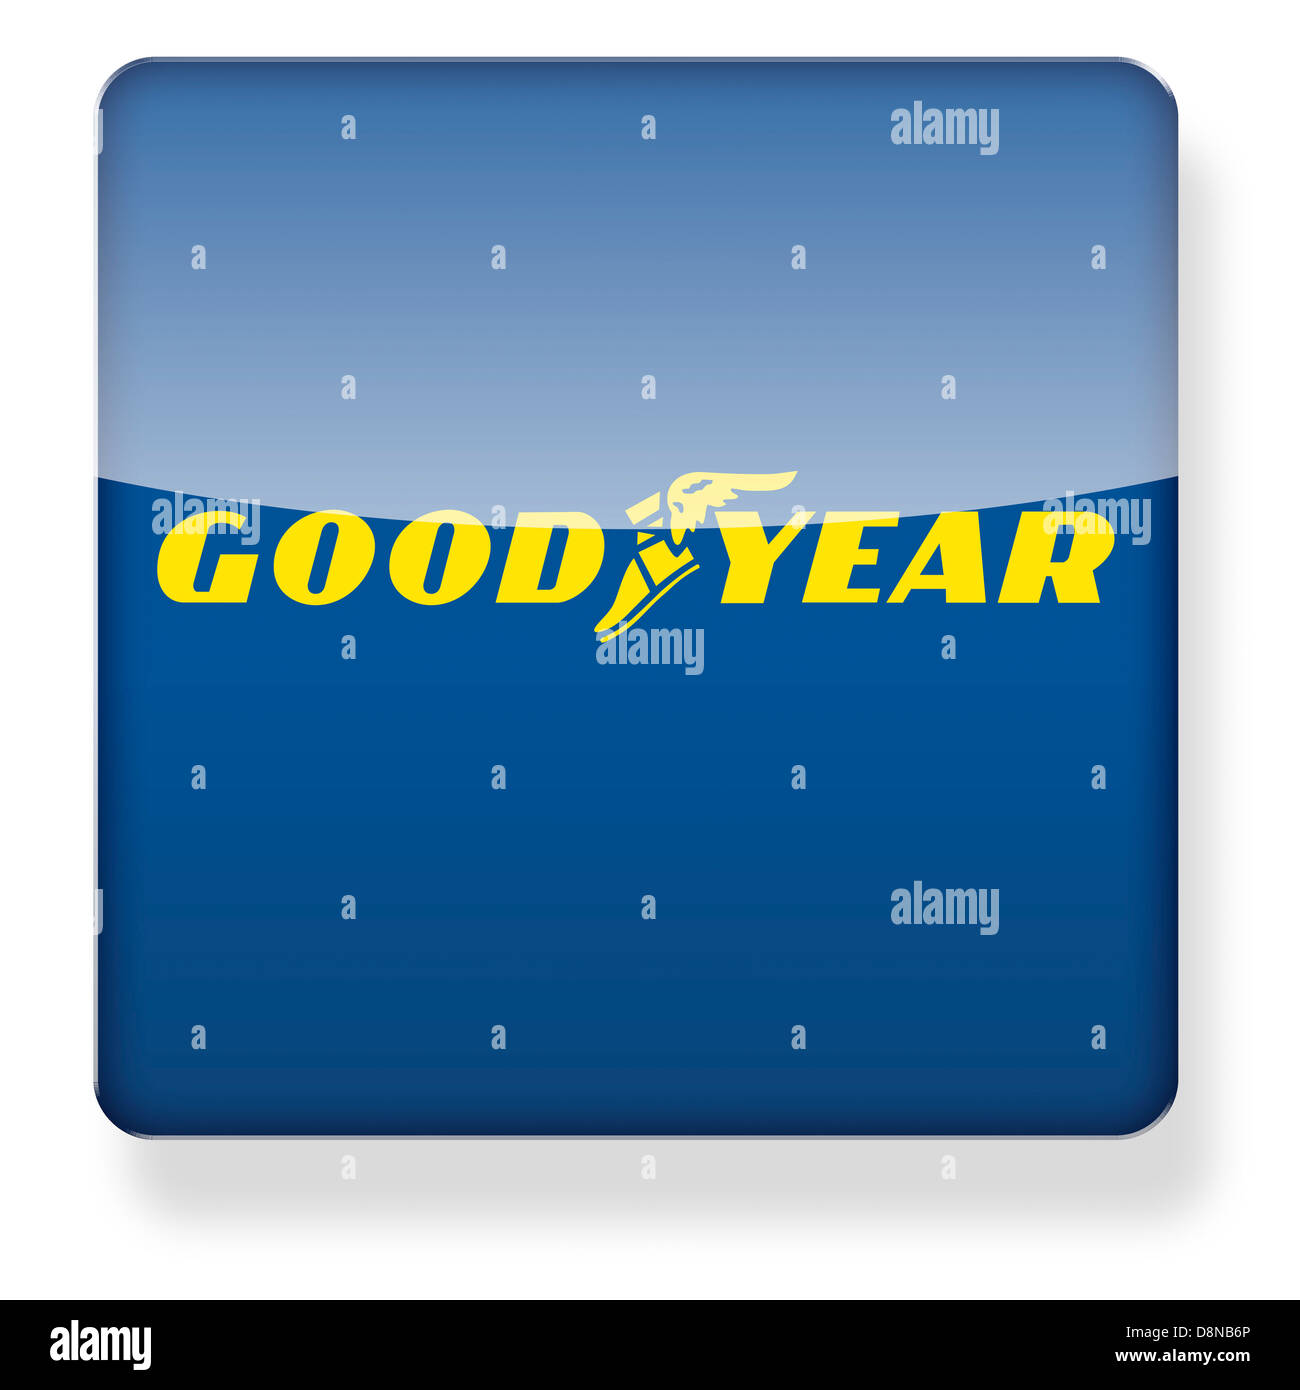 Goodyear logo as an app icon. Clipping path included. Stock Photo